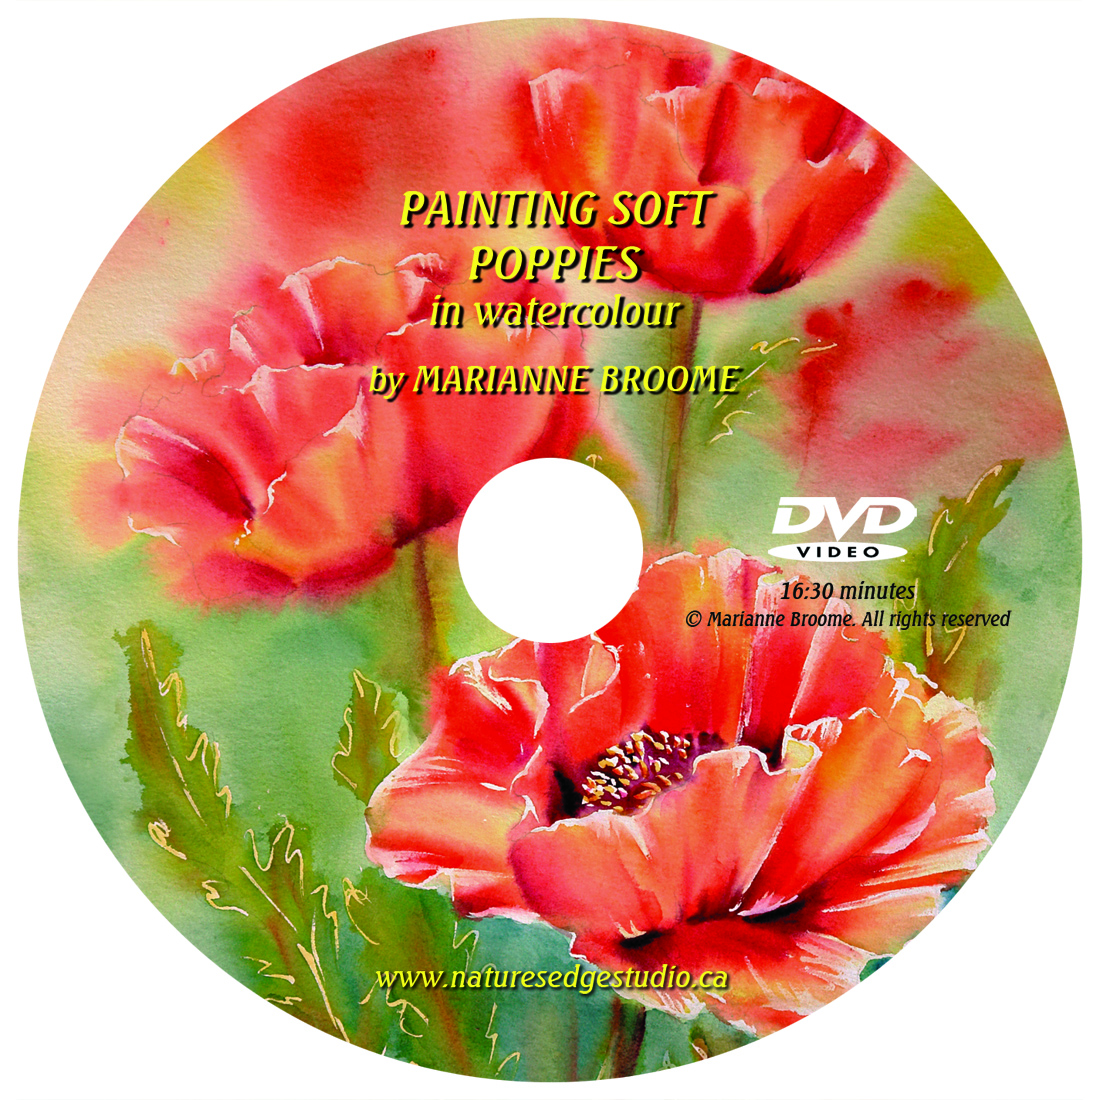 Painting Soft Poppies